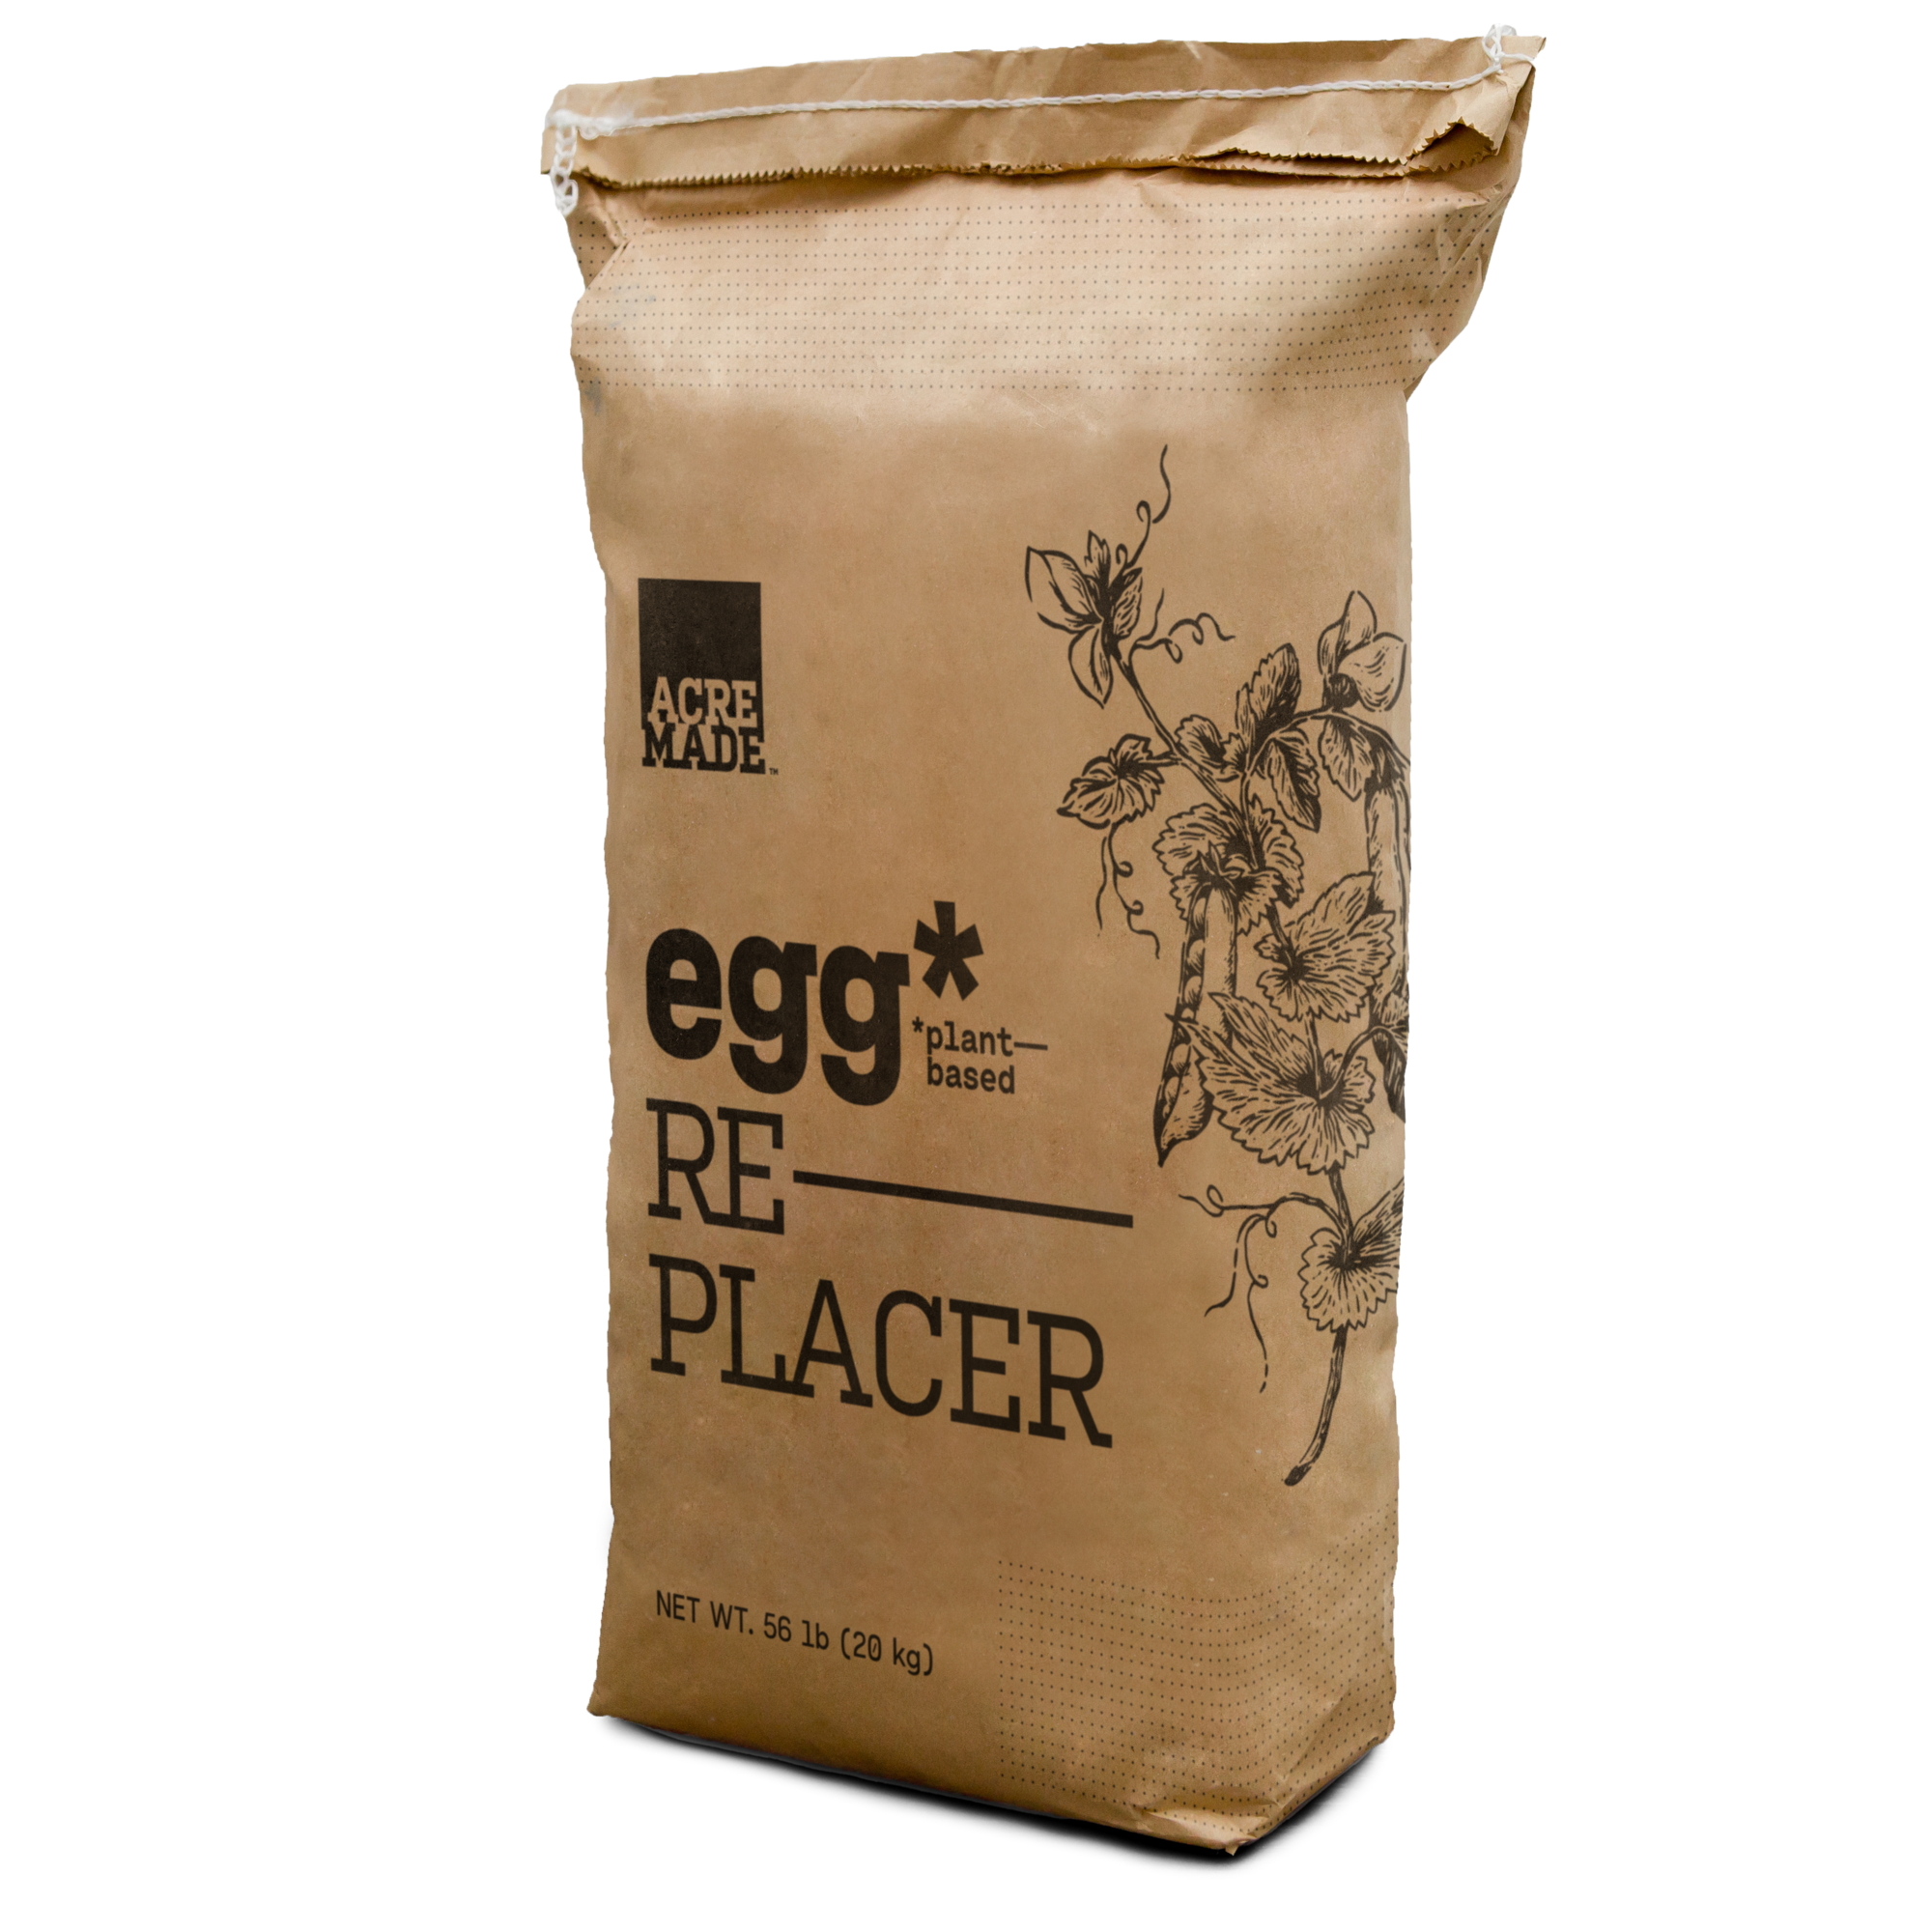 Acremade Plant-Based Egg Replacer